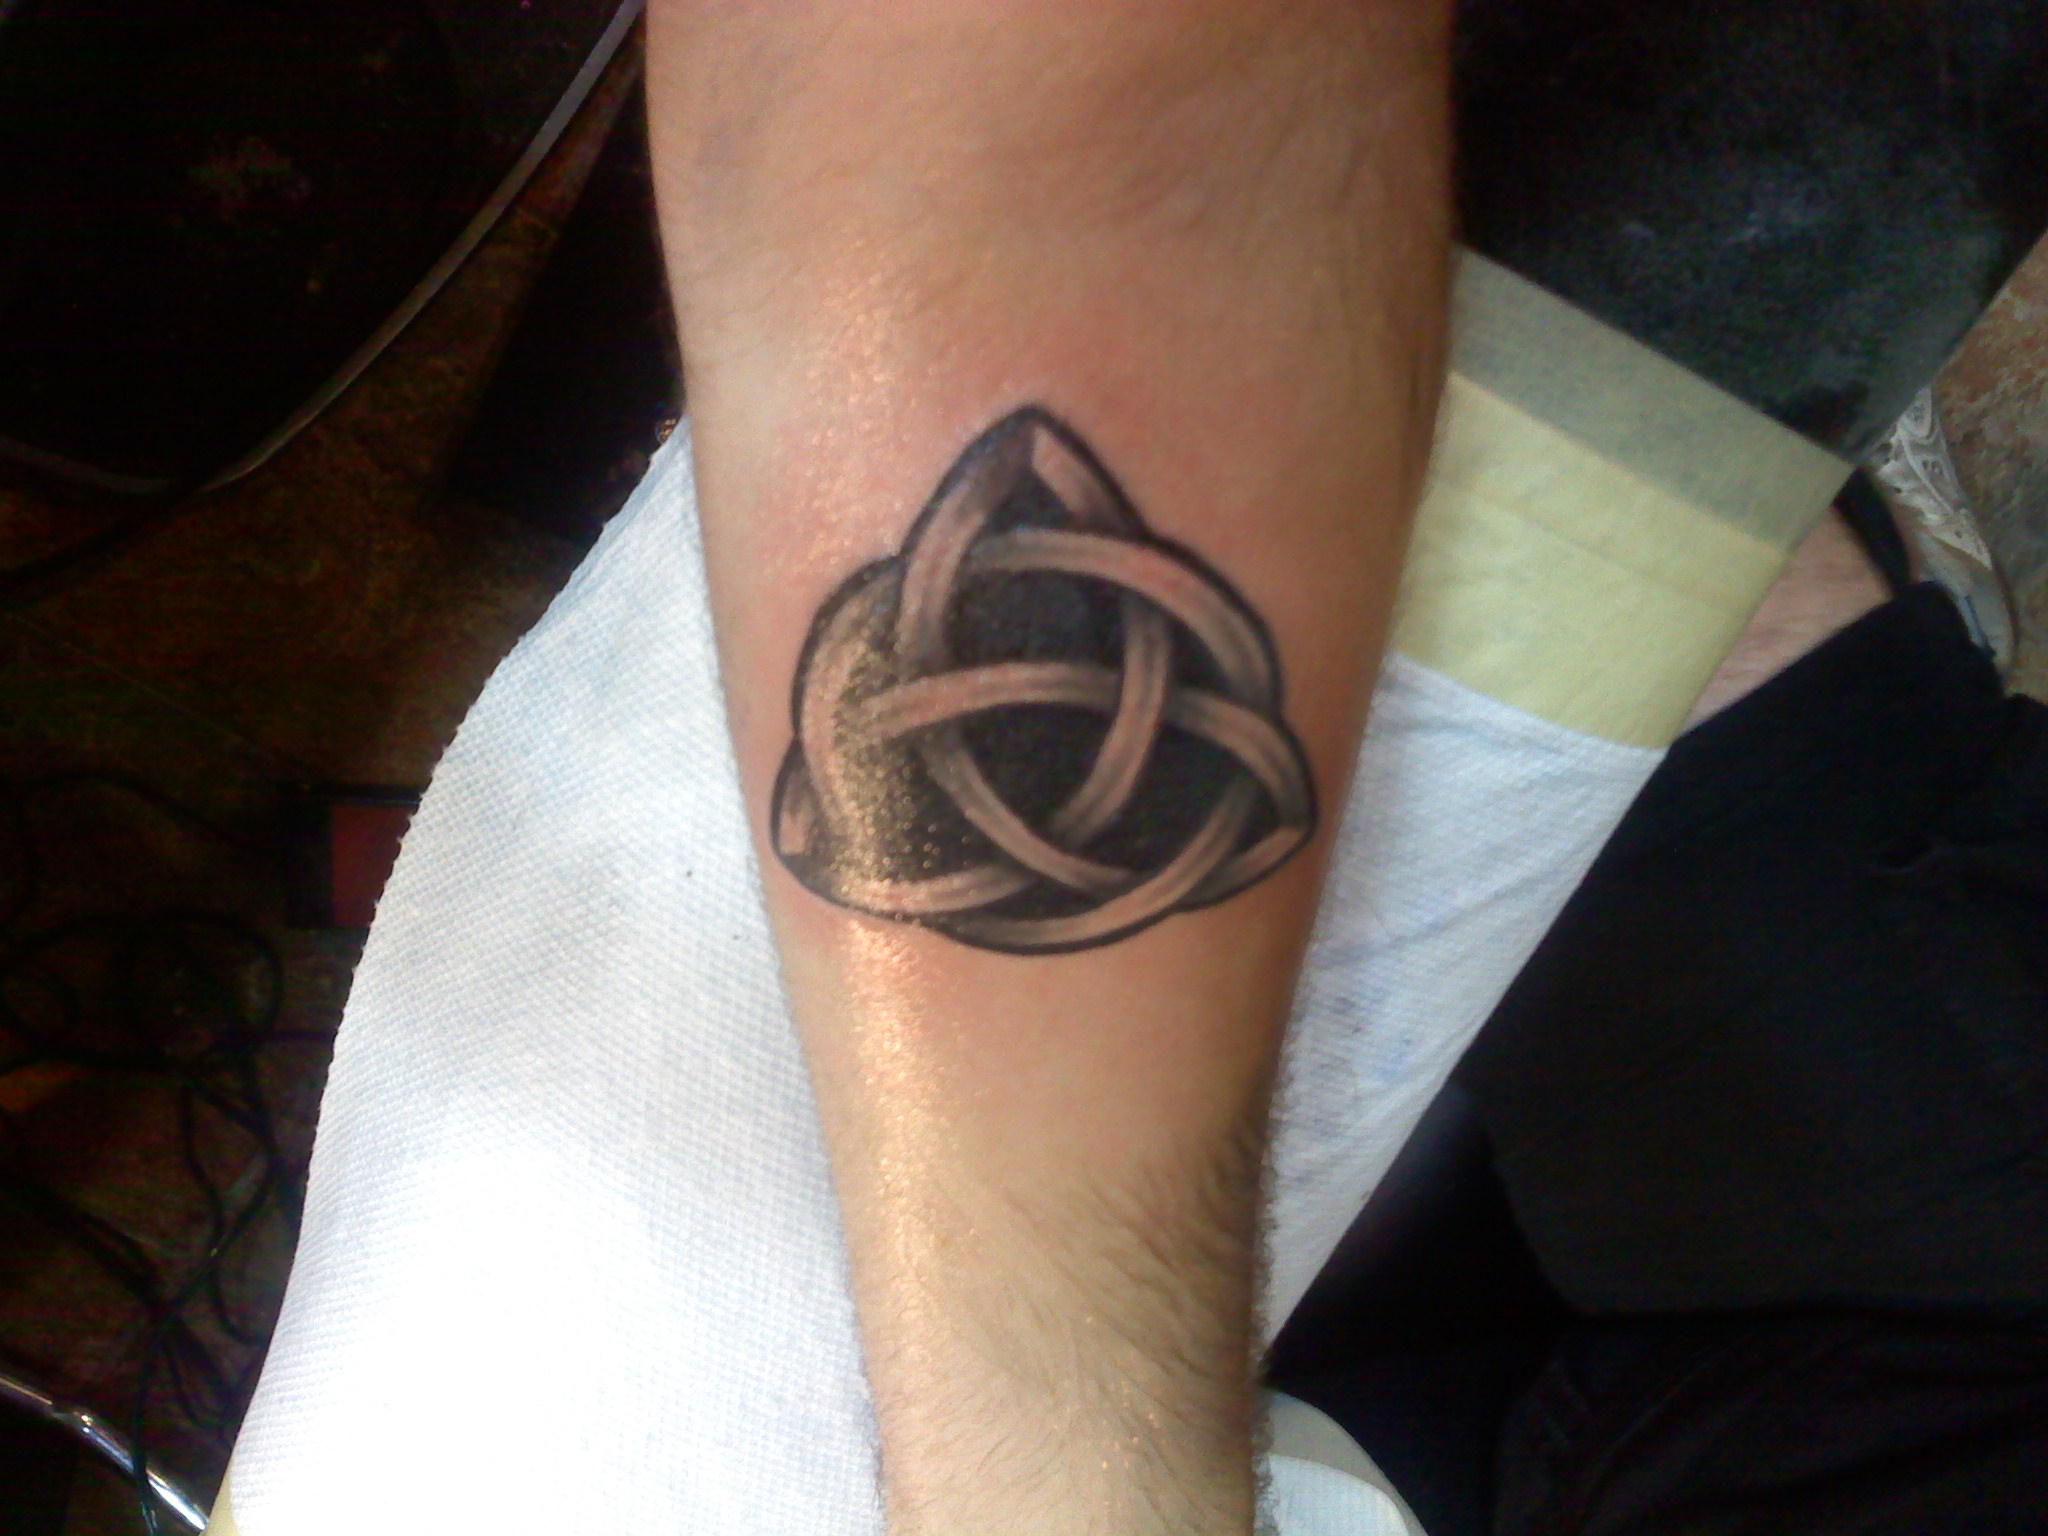 Celtic Knot Tattoos Designs, Ideas and Meaning | Tattoos ...